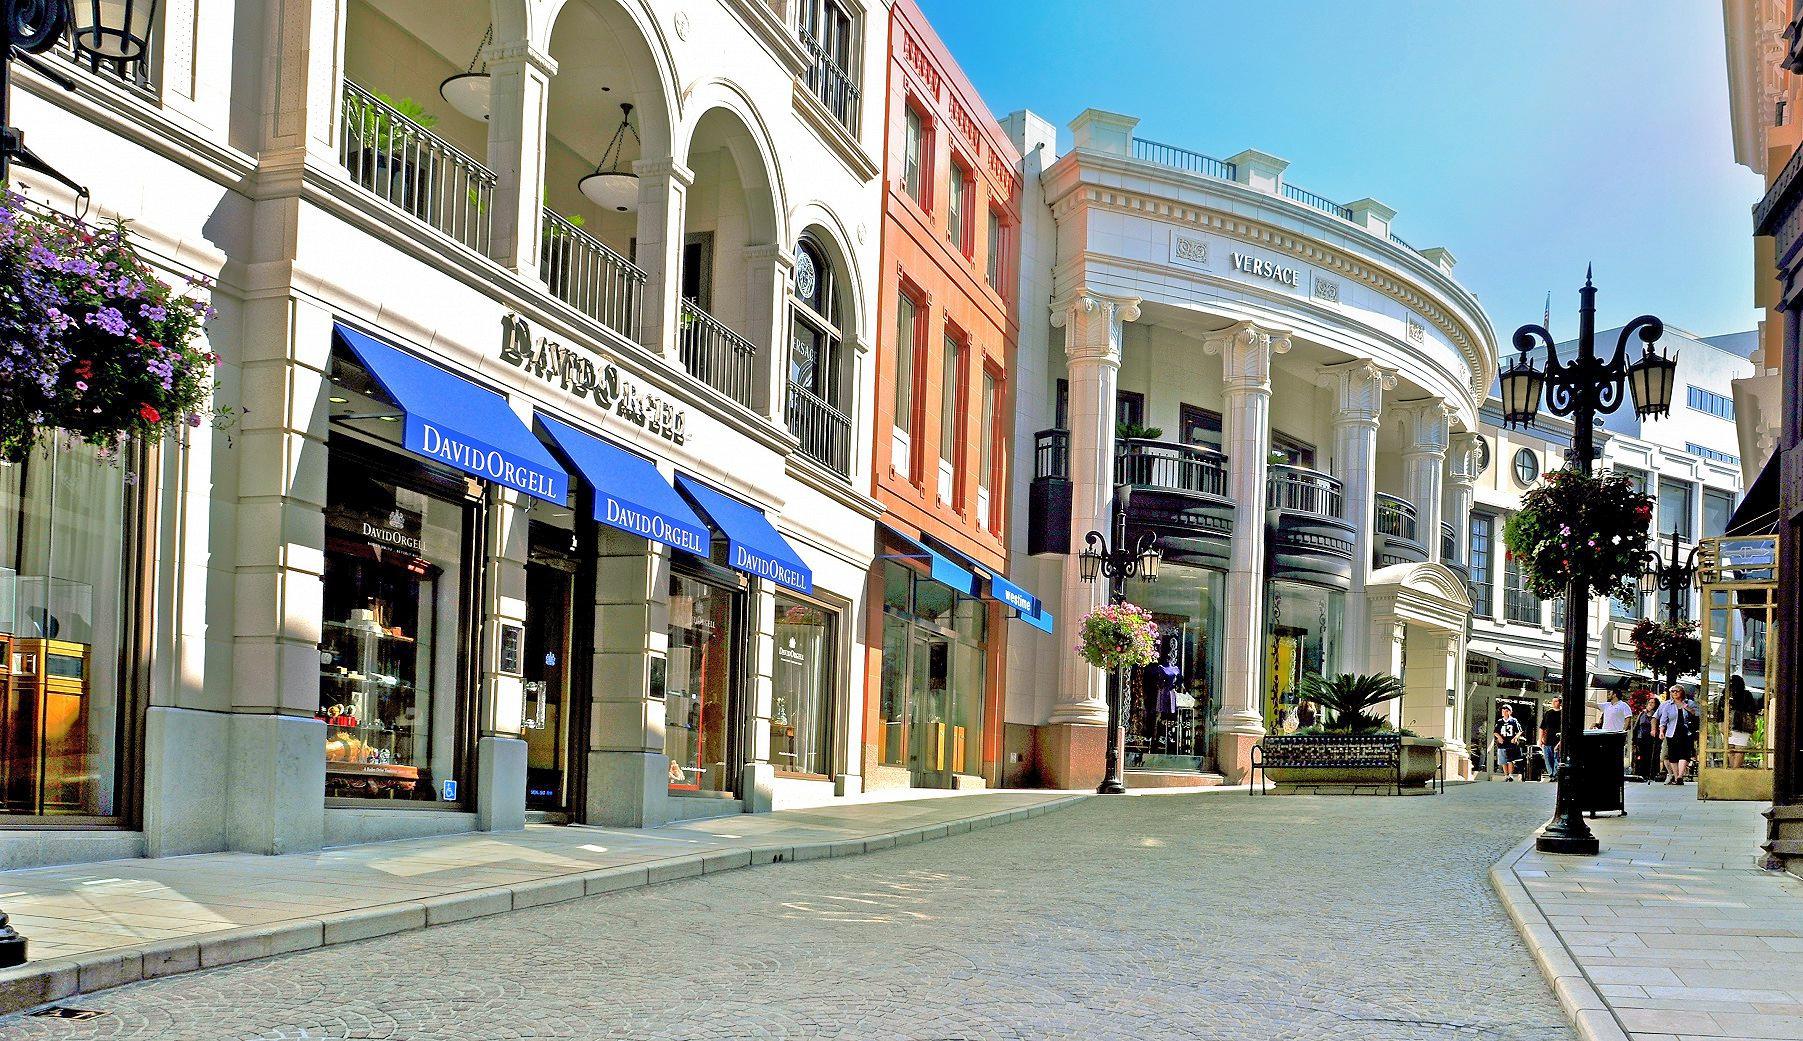 Rodeo Drive in Los Angeles - Tours and Activities